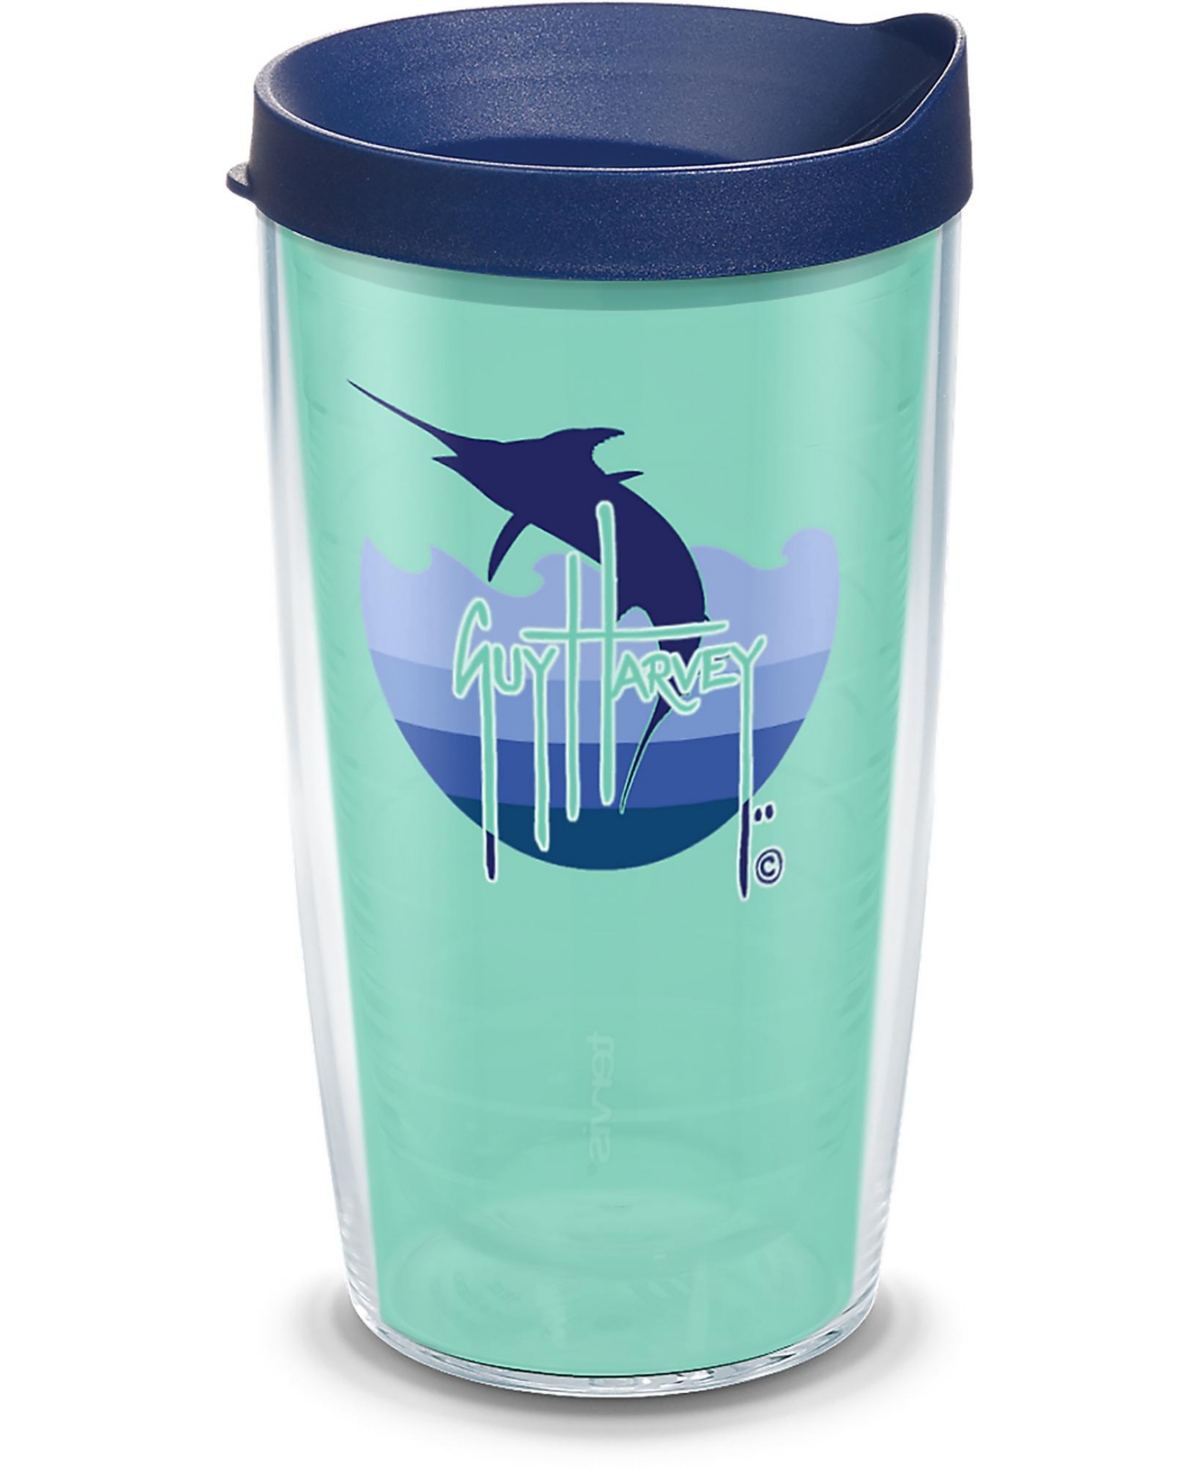 Tervis Tumbler Tervis Guy Harvey Mint And Navy Marlin Made In Usa Double Walled Insulated Tumbler Travel Cup Keeps  In Open Miscellaneous